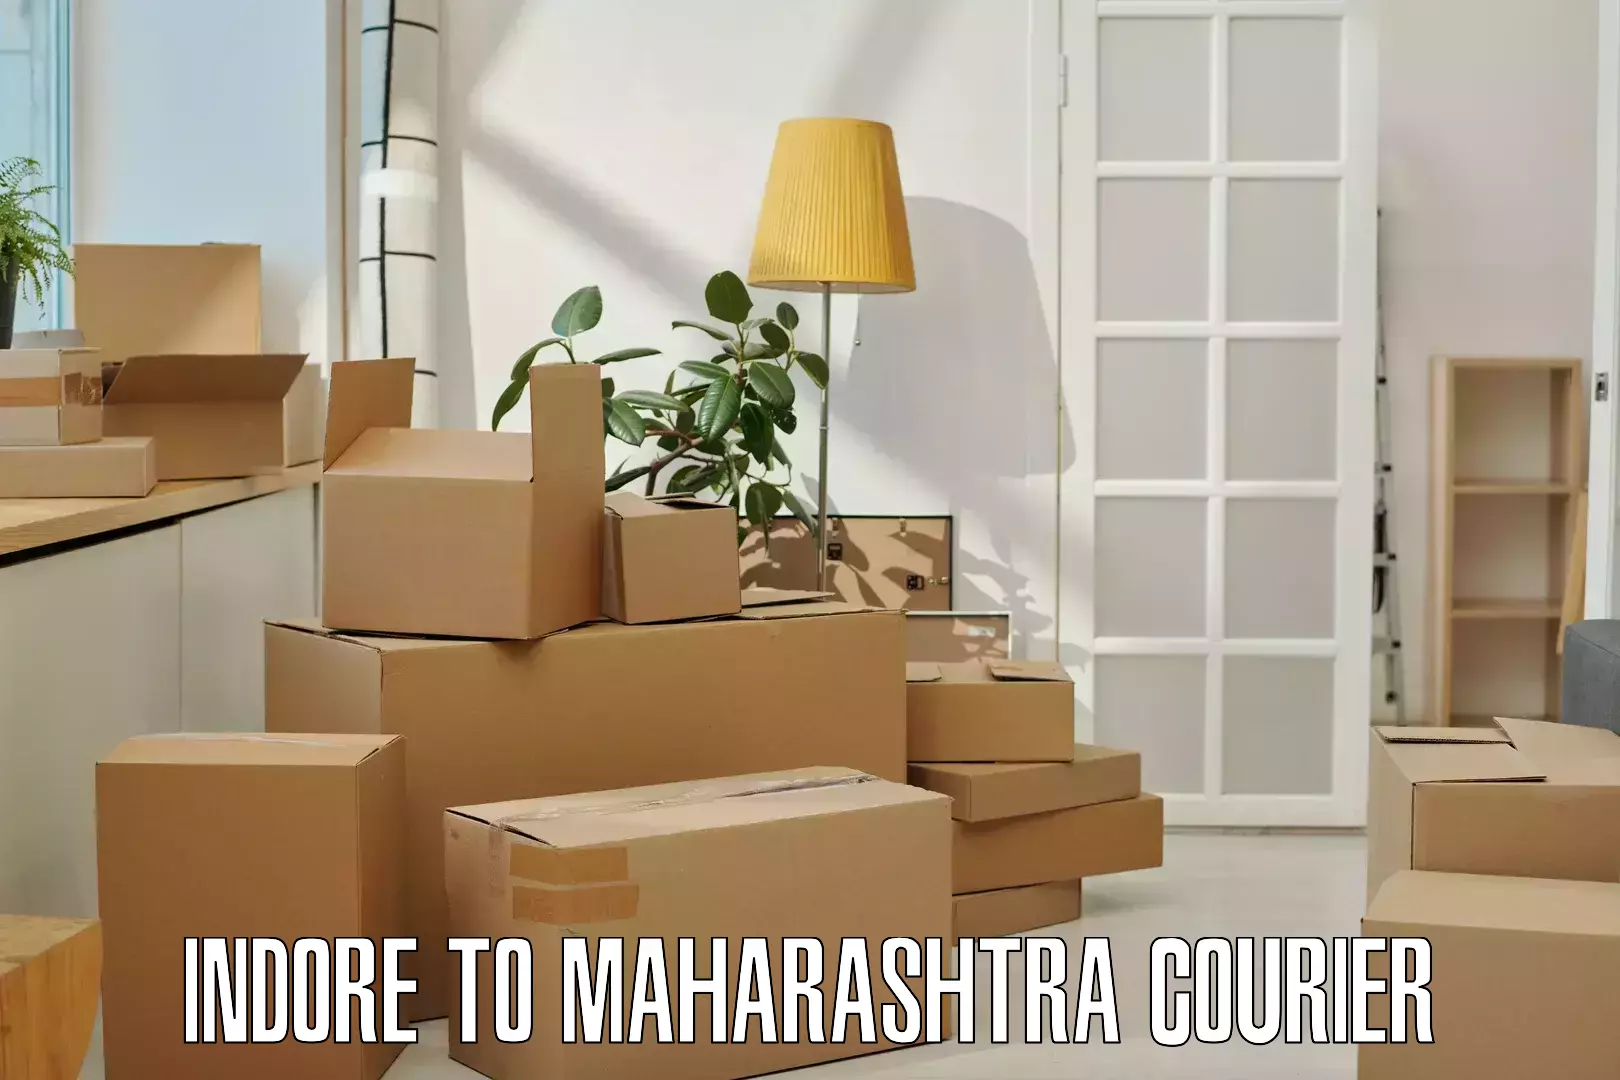 Tech-enabled shipping Indore to Mahabaleshwar